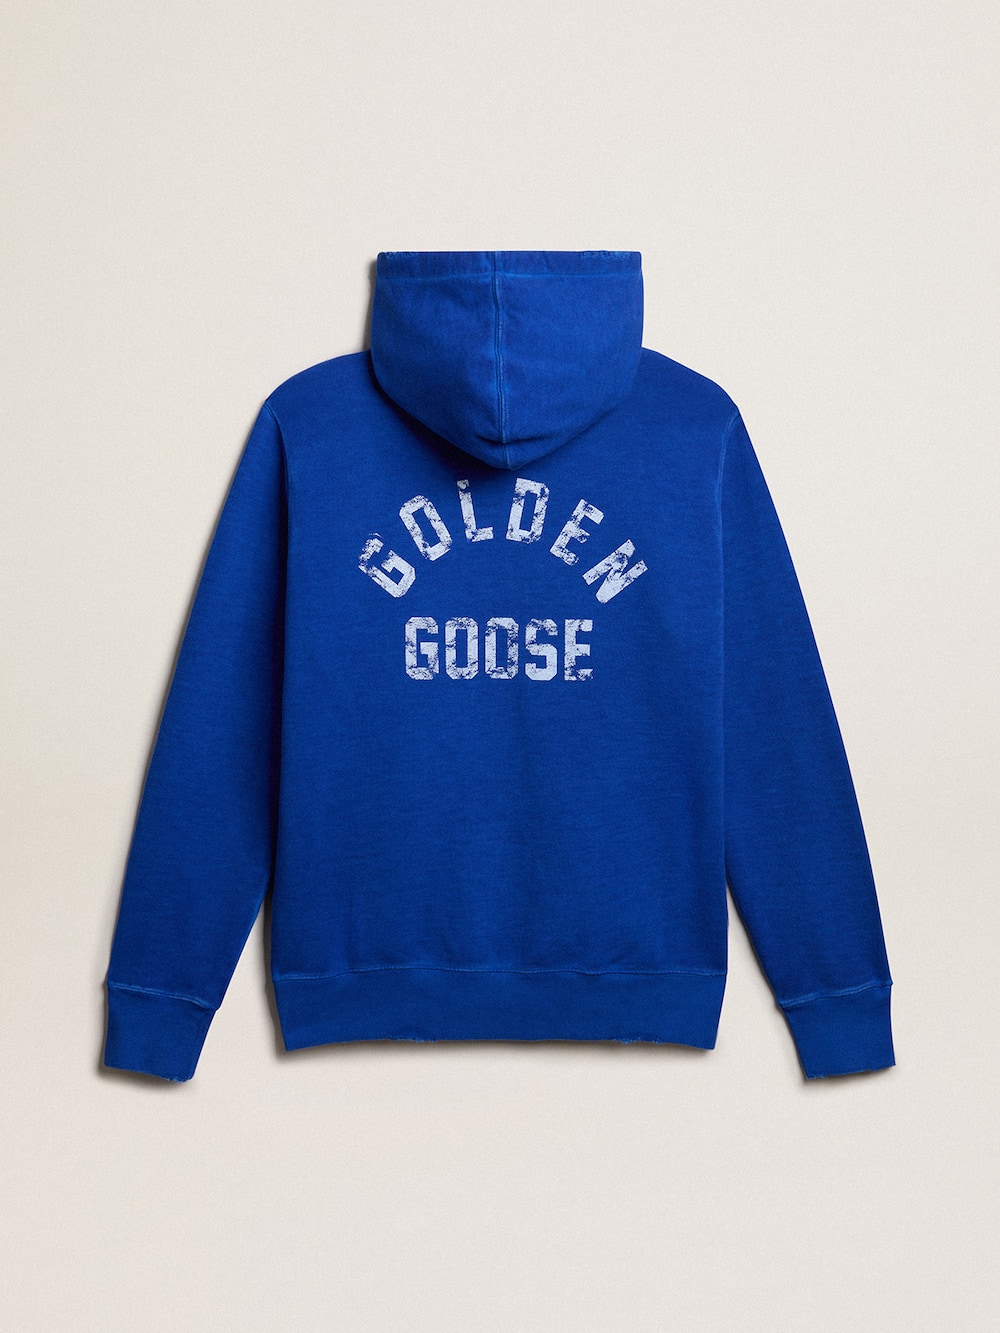 Golden Goose - Men's blue-colored hoodie with lettering on the back in 